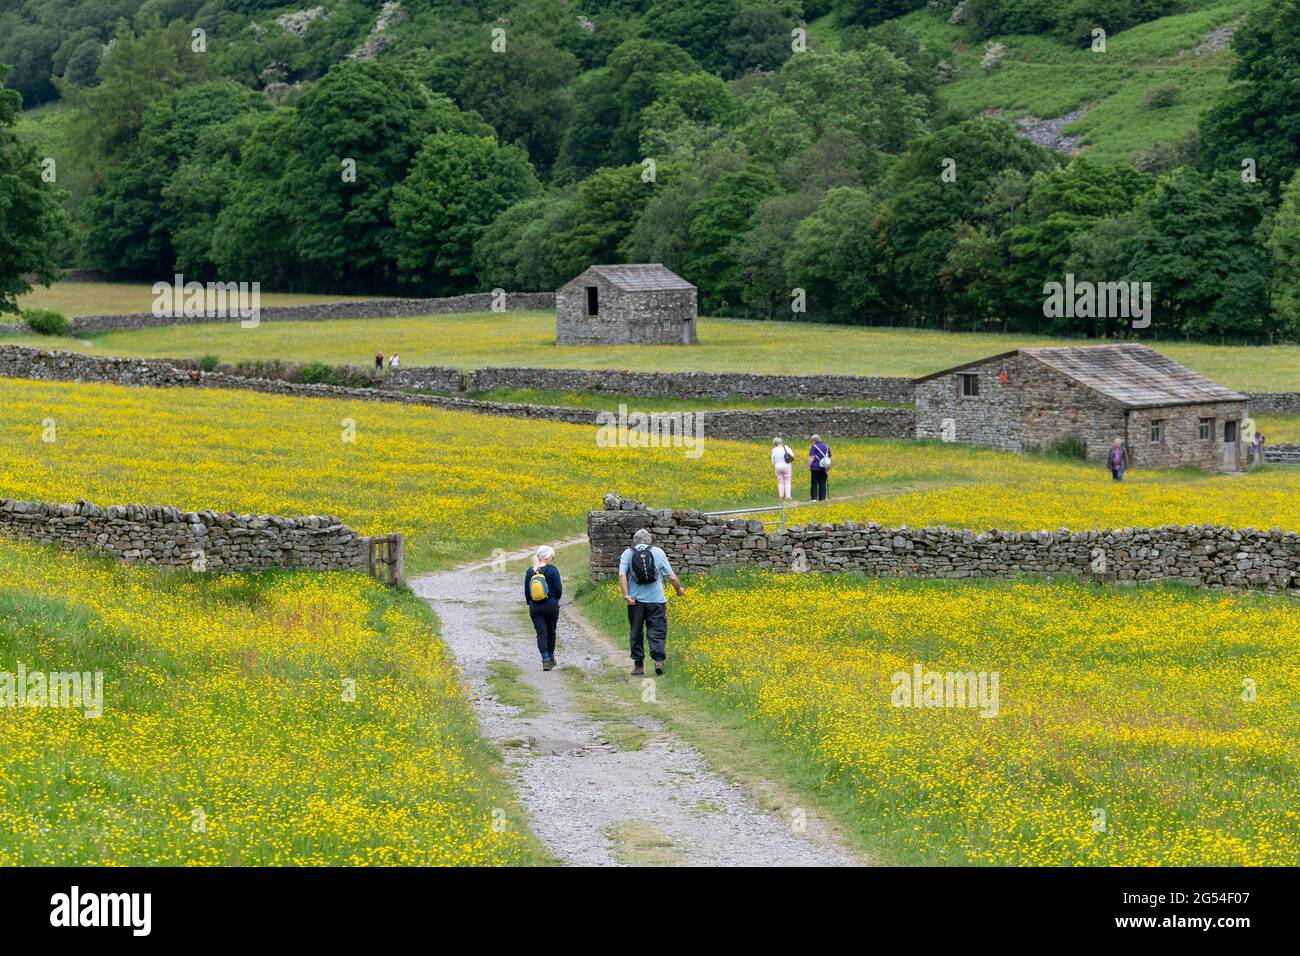 Walkers visiting the Muker meadows in early summer when they are in full bloom. Yorkshire Dales National Park, UK. Stock Photo